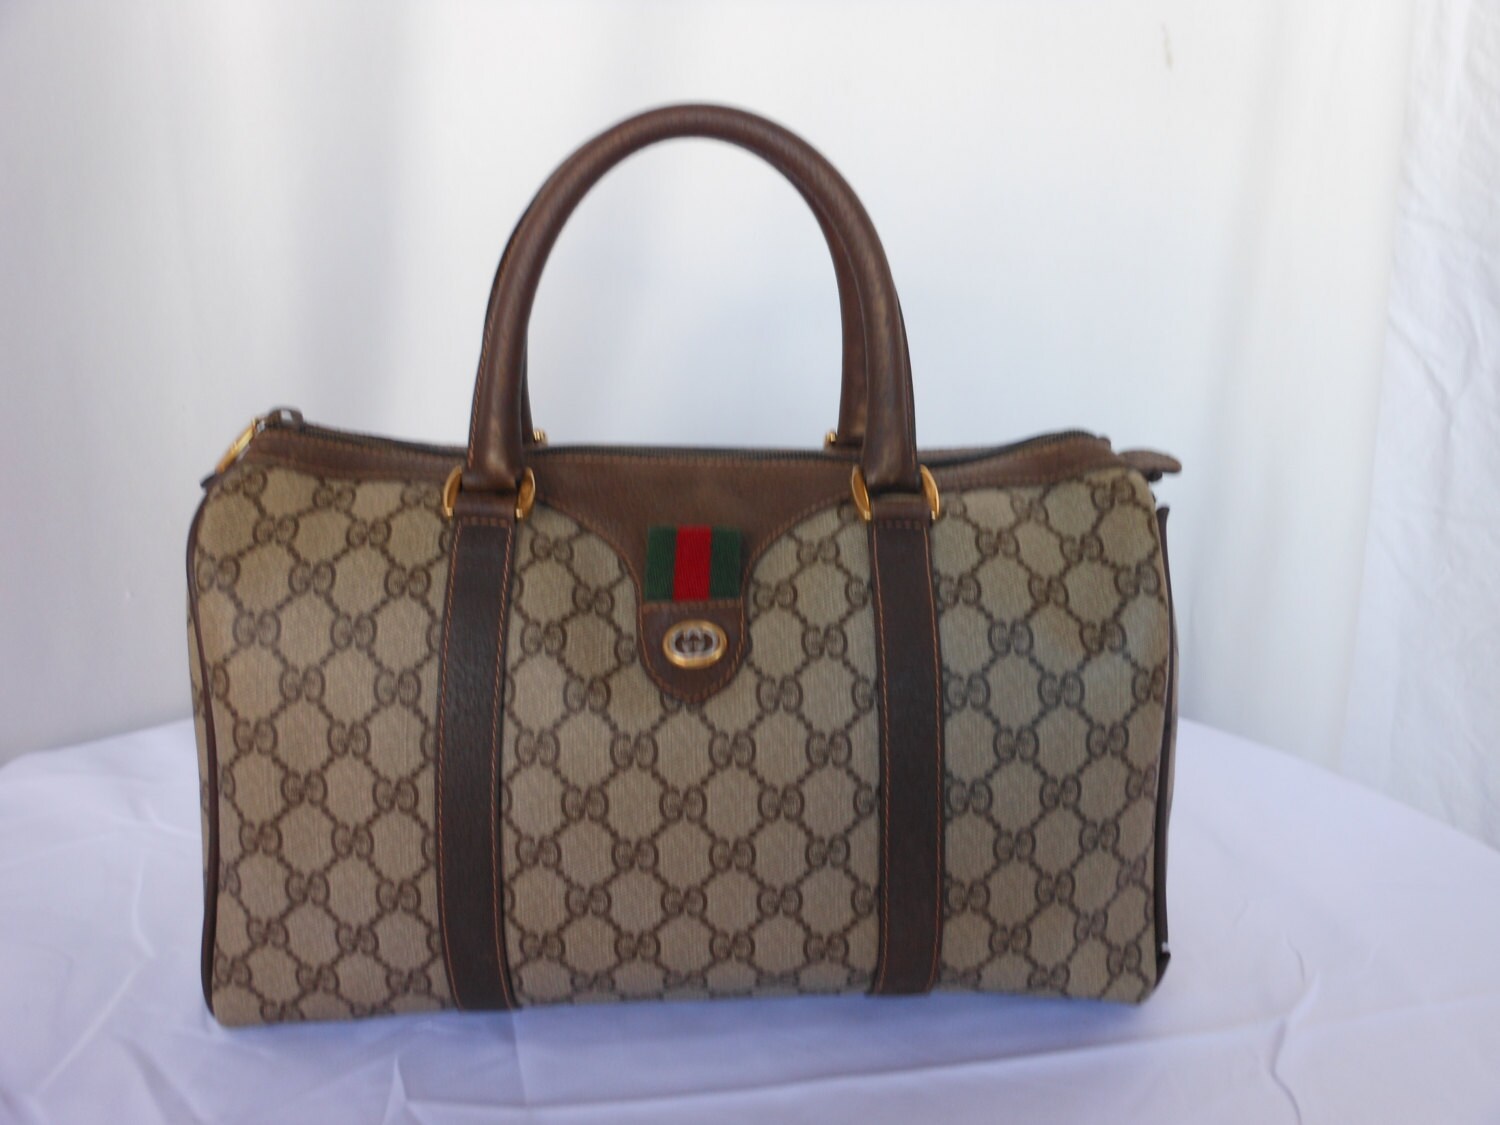 Vintage Gucci Handbags 1980s | Confederated Tribes of the Umatilla Indian Reservation